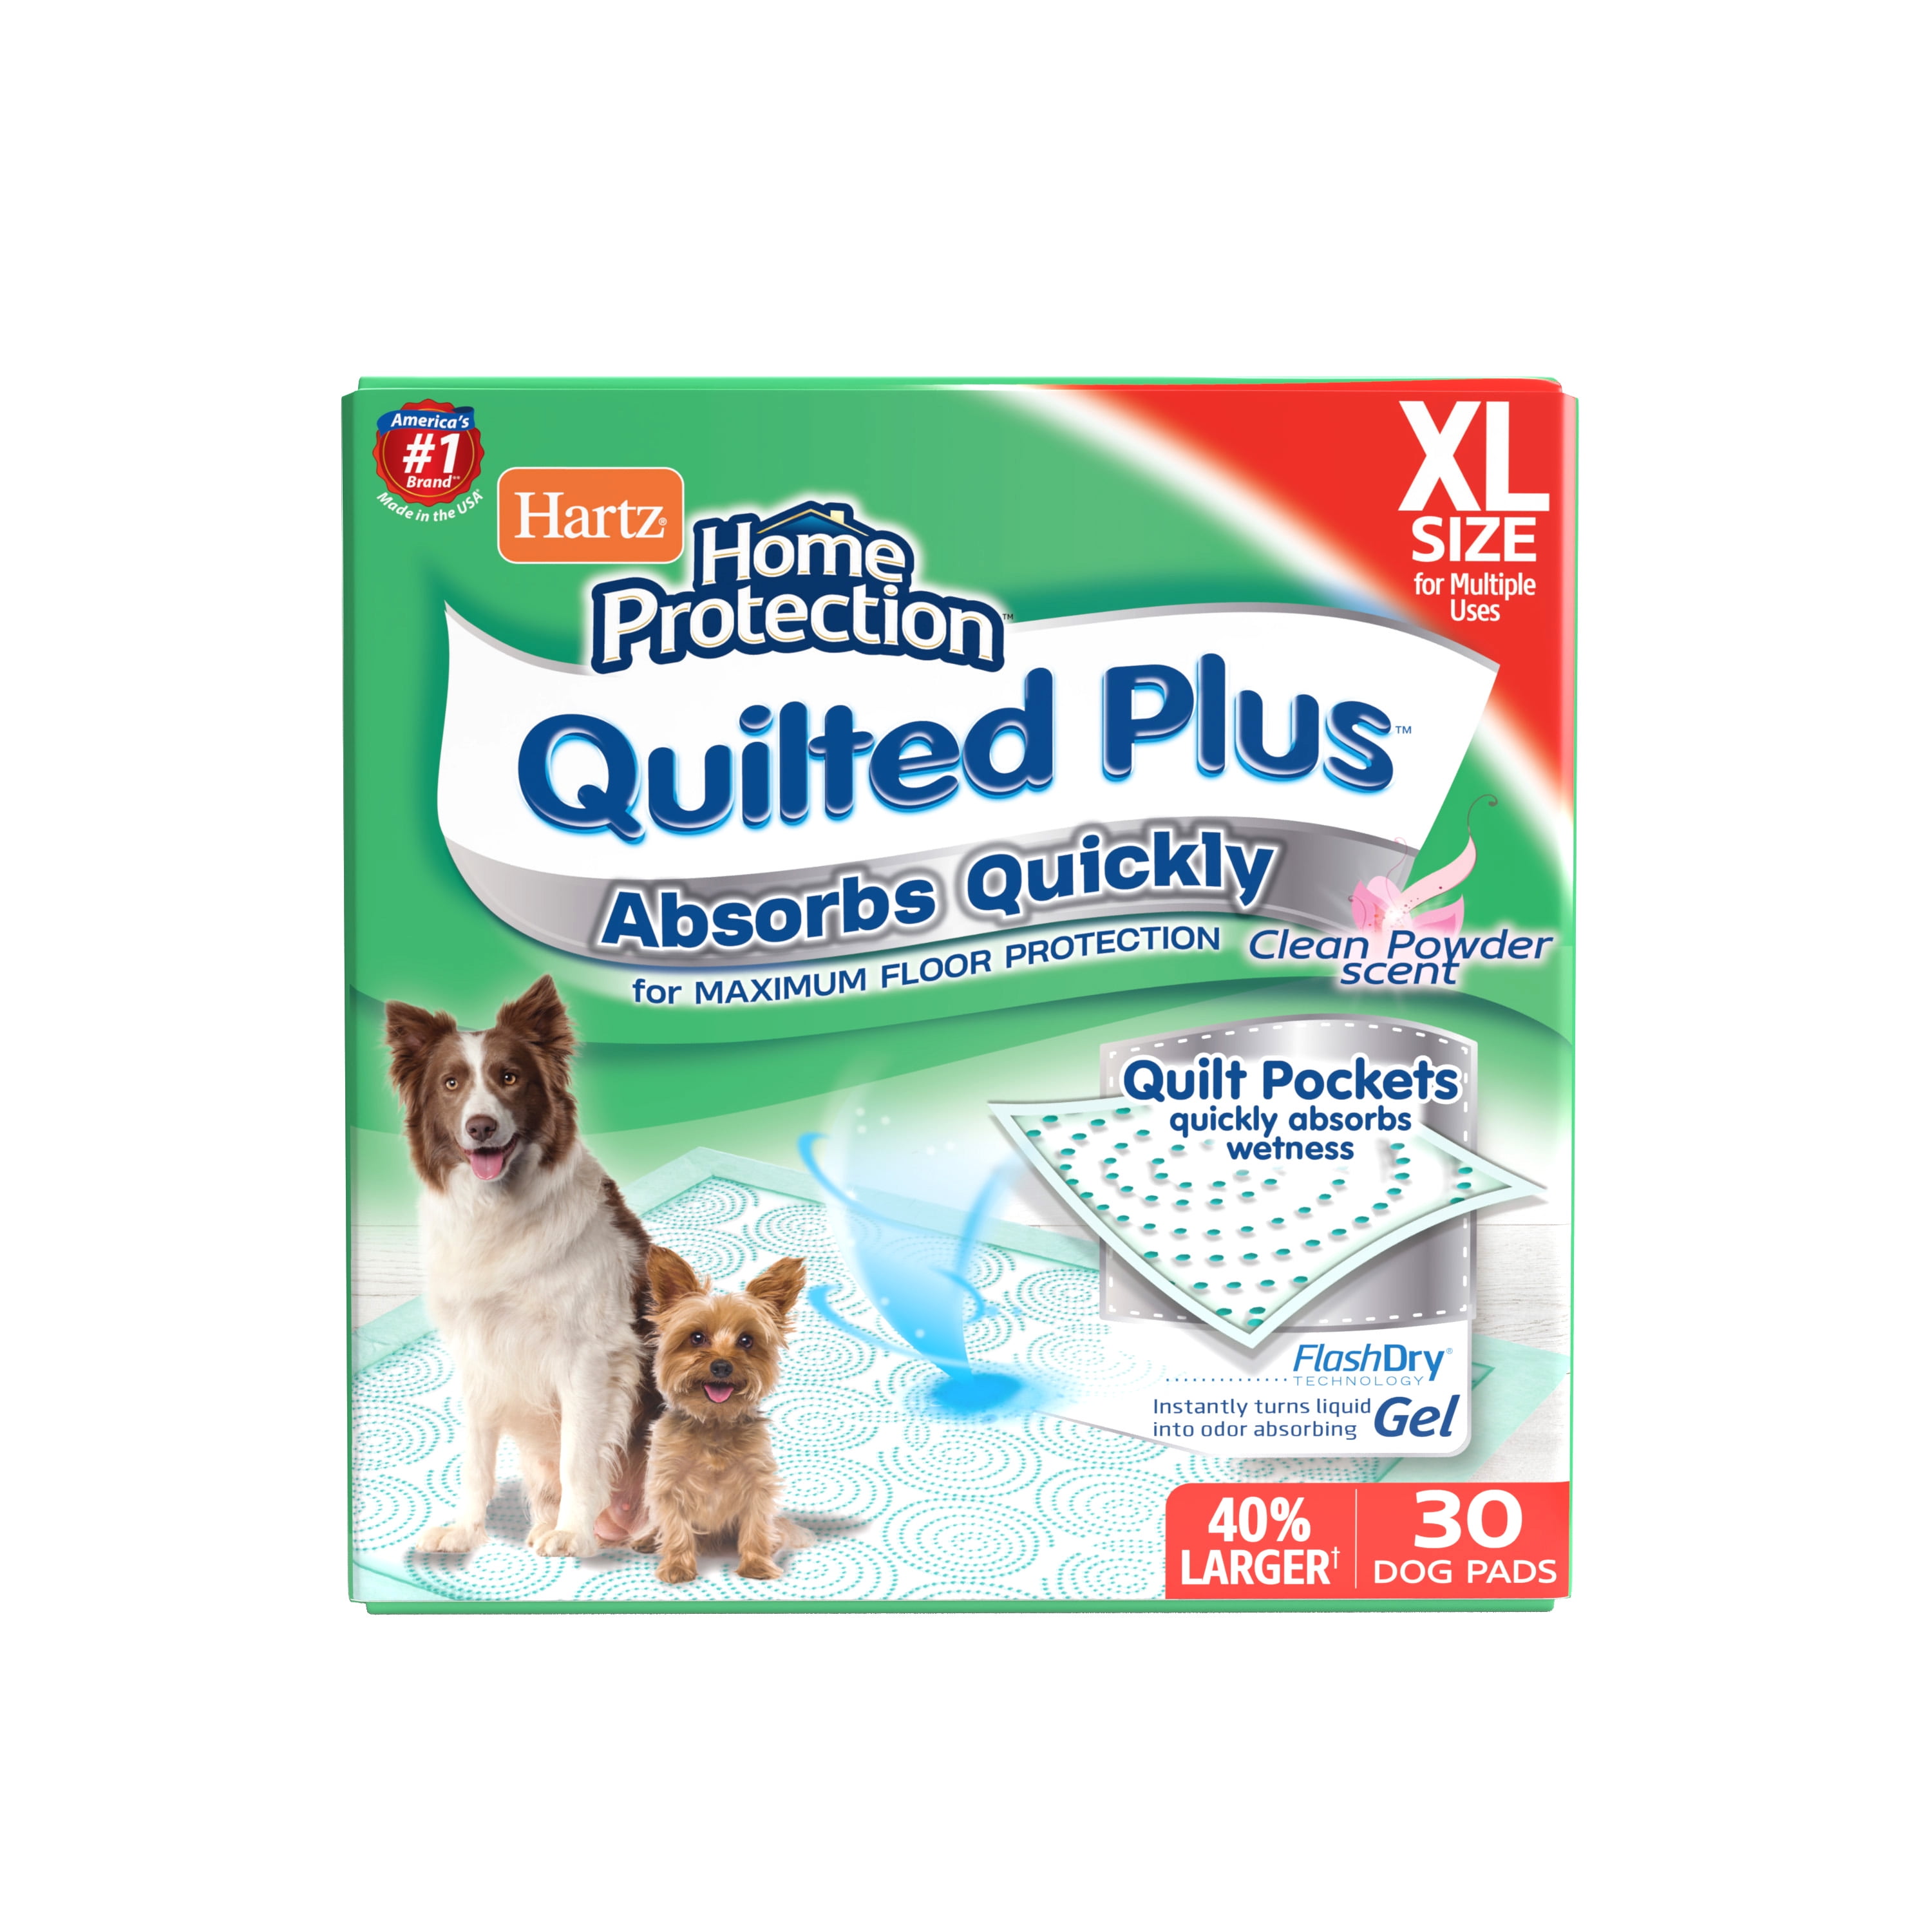 30 Count 30 x 21 Hartz Home Protection Quilted Plus Clean Powder Scent Dog Pads